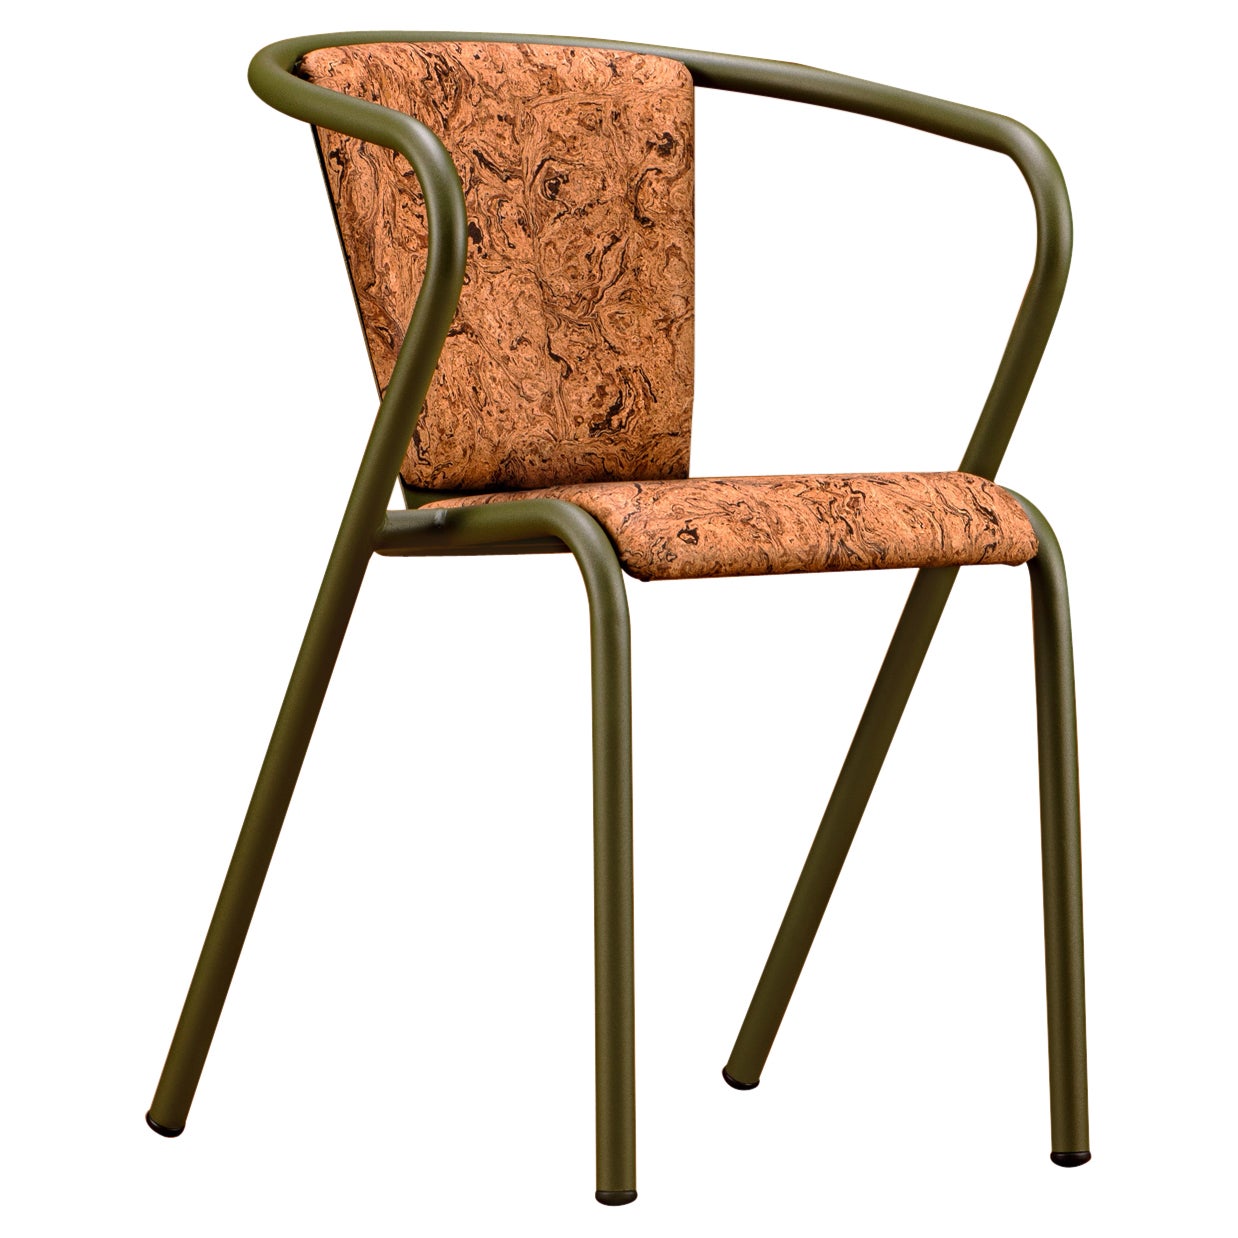 BICAchair Modern Steel Armchair Olive, Upholstery in Natural Cork Brown Mescla For Sale